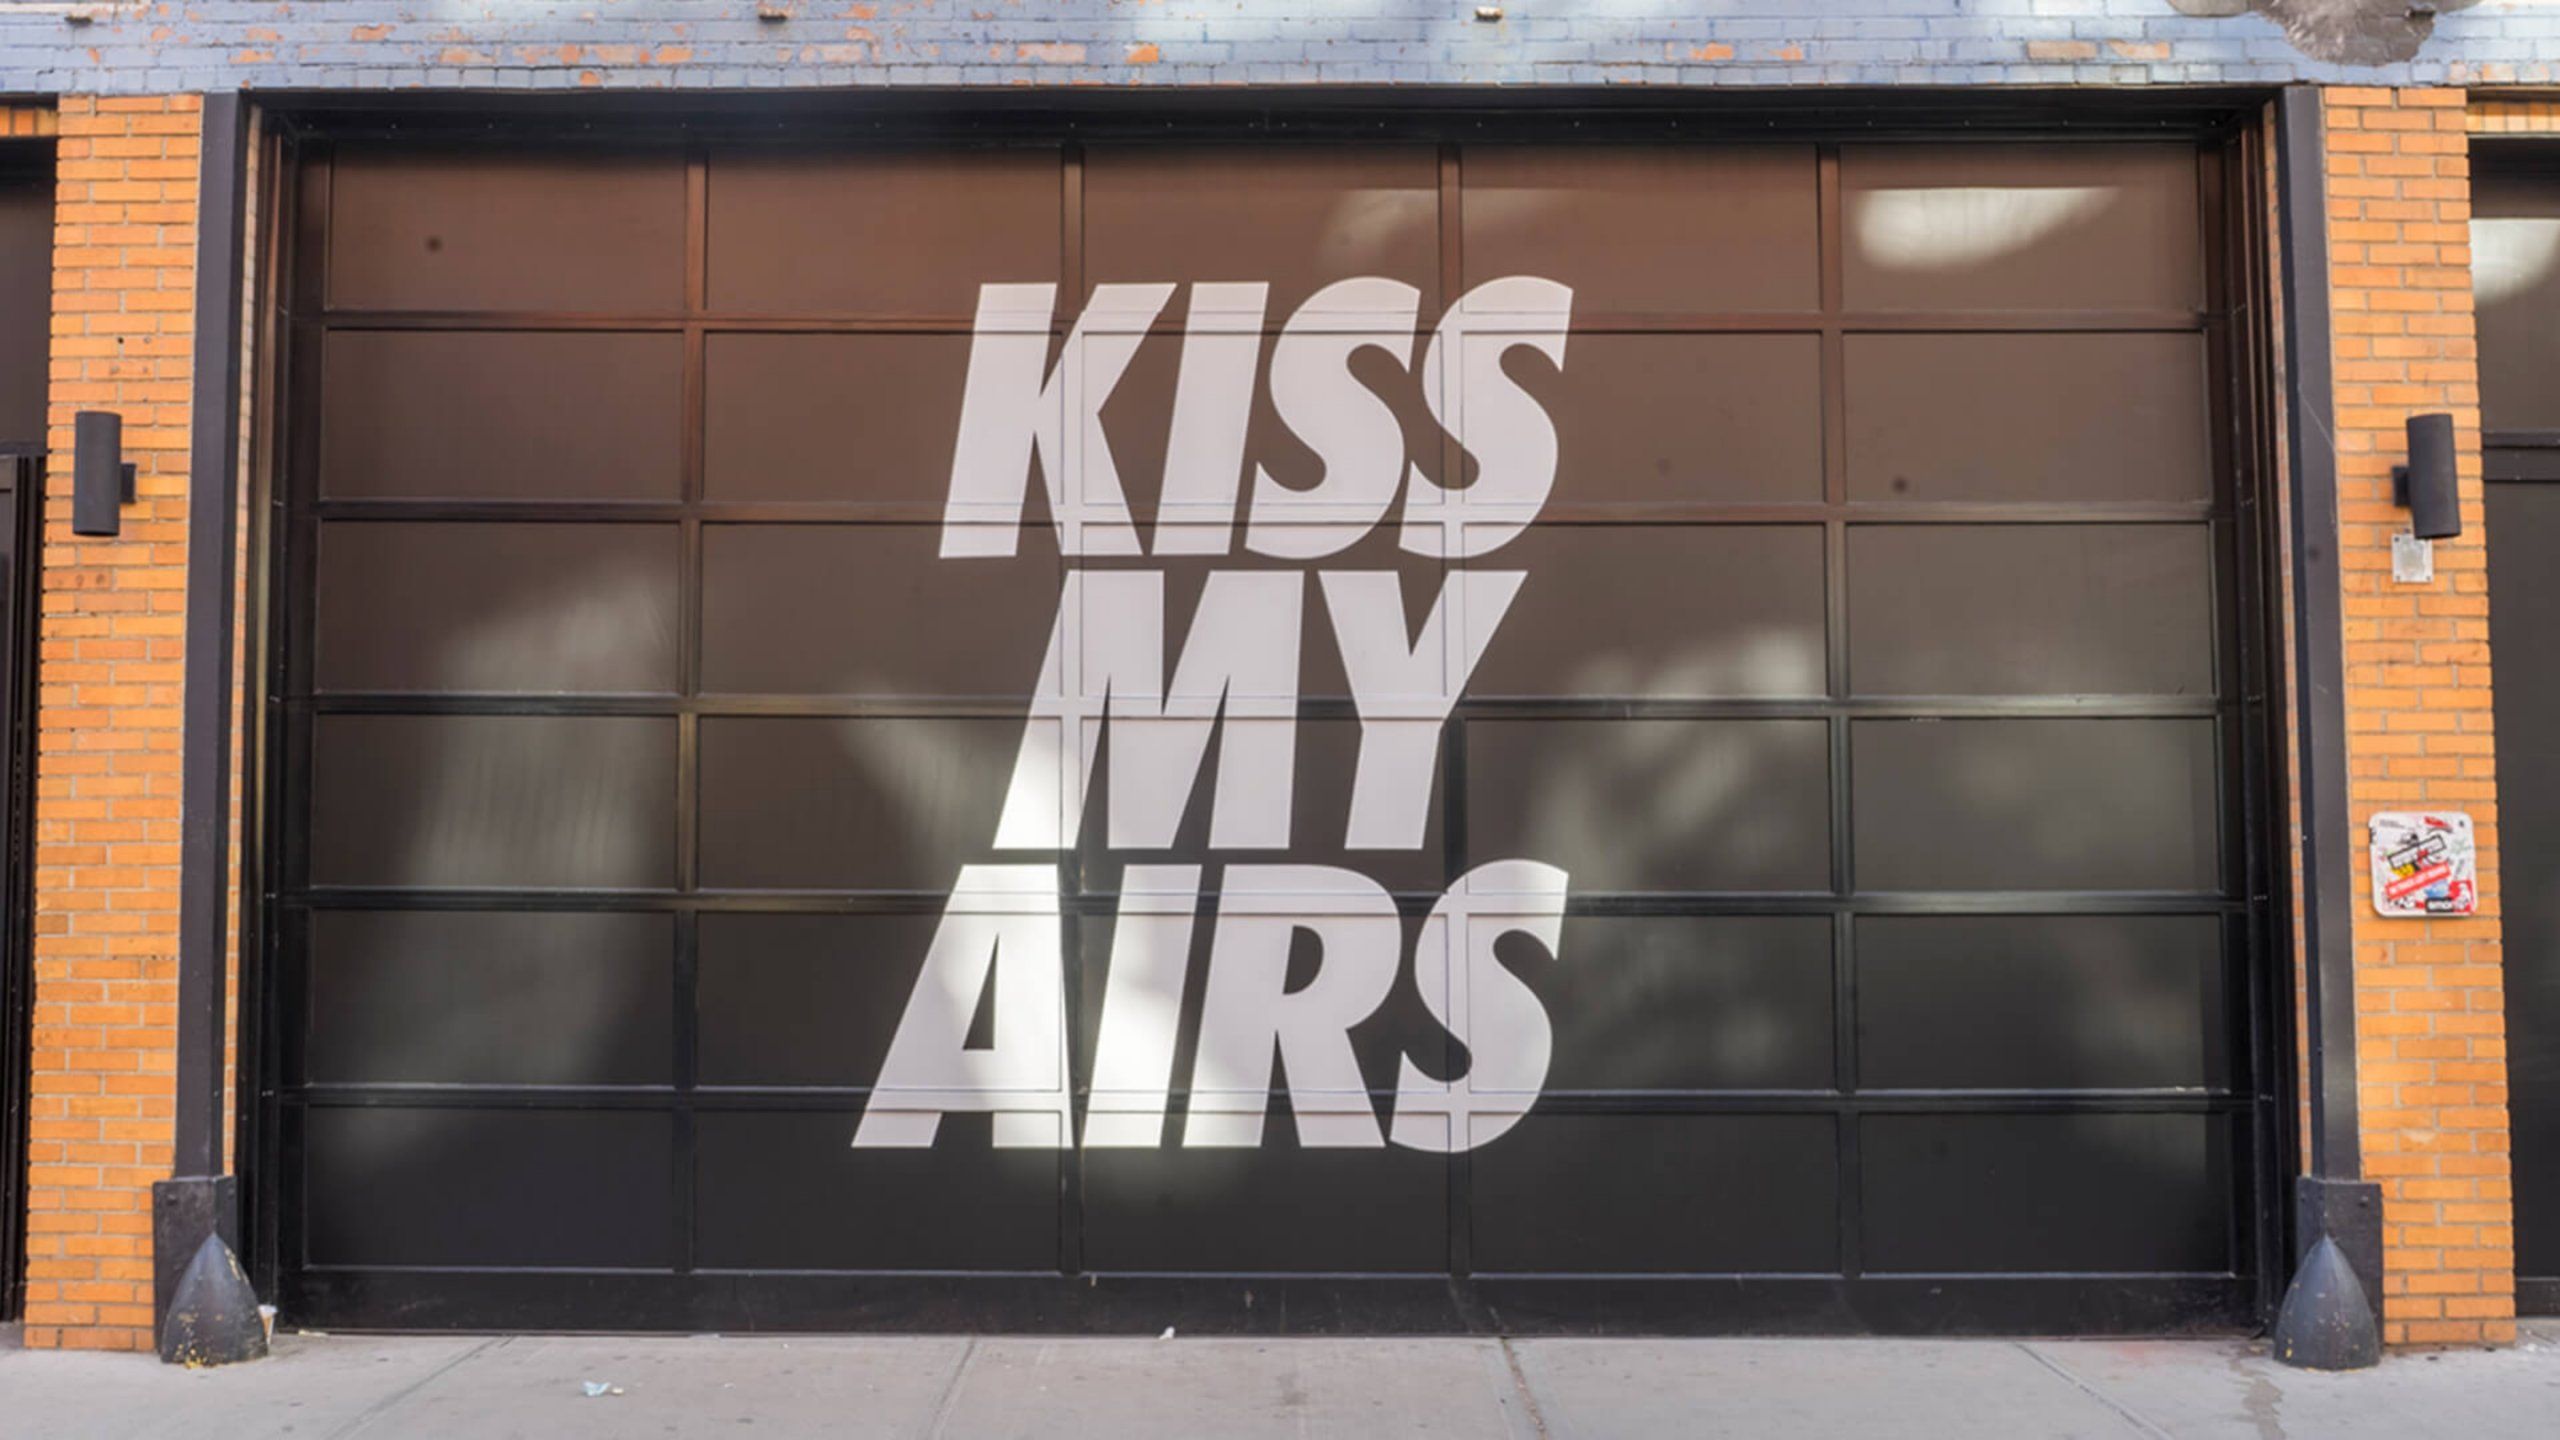 Industrial garage door with KISS MY AIRS displayed in bold letters